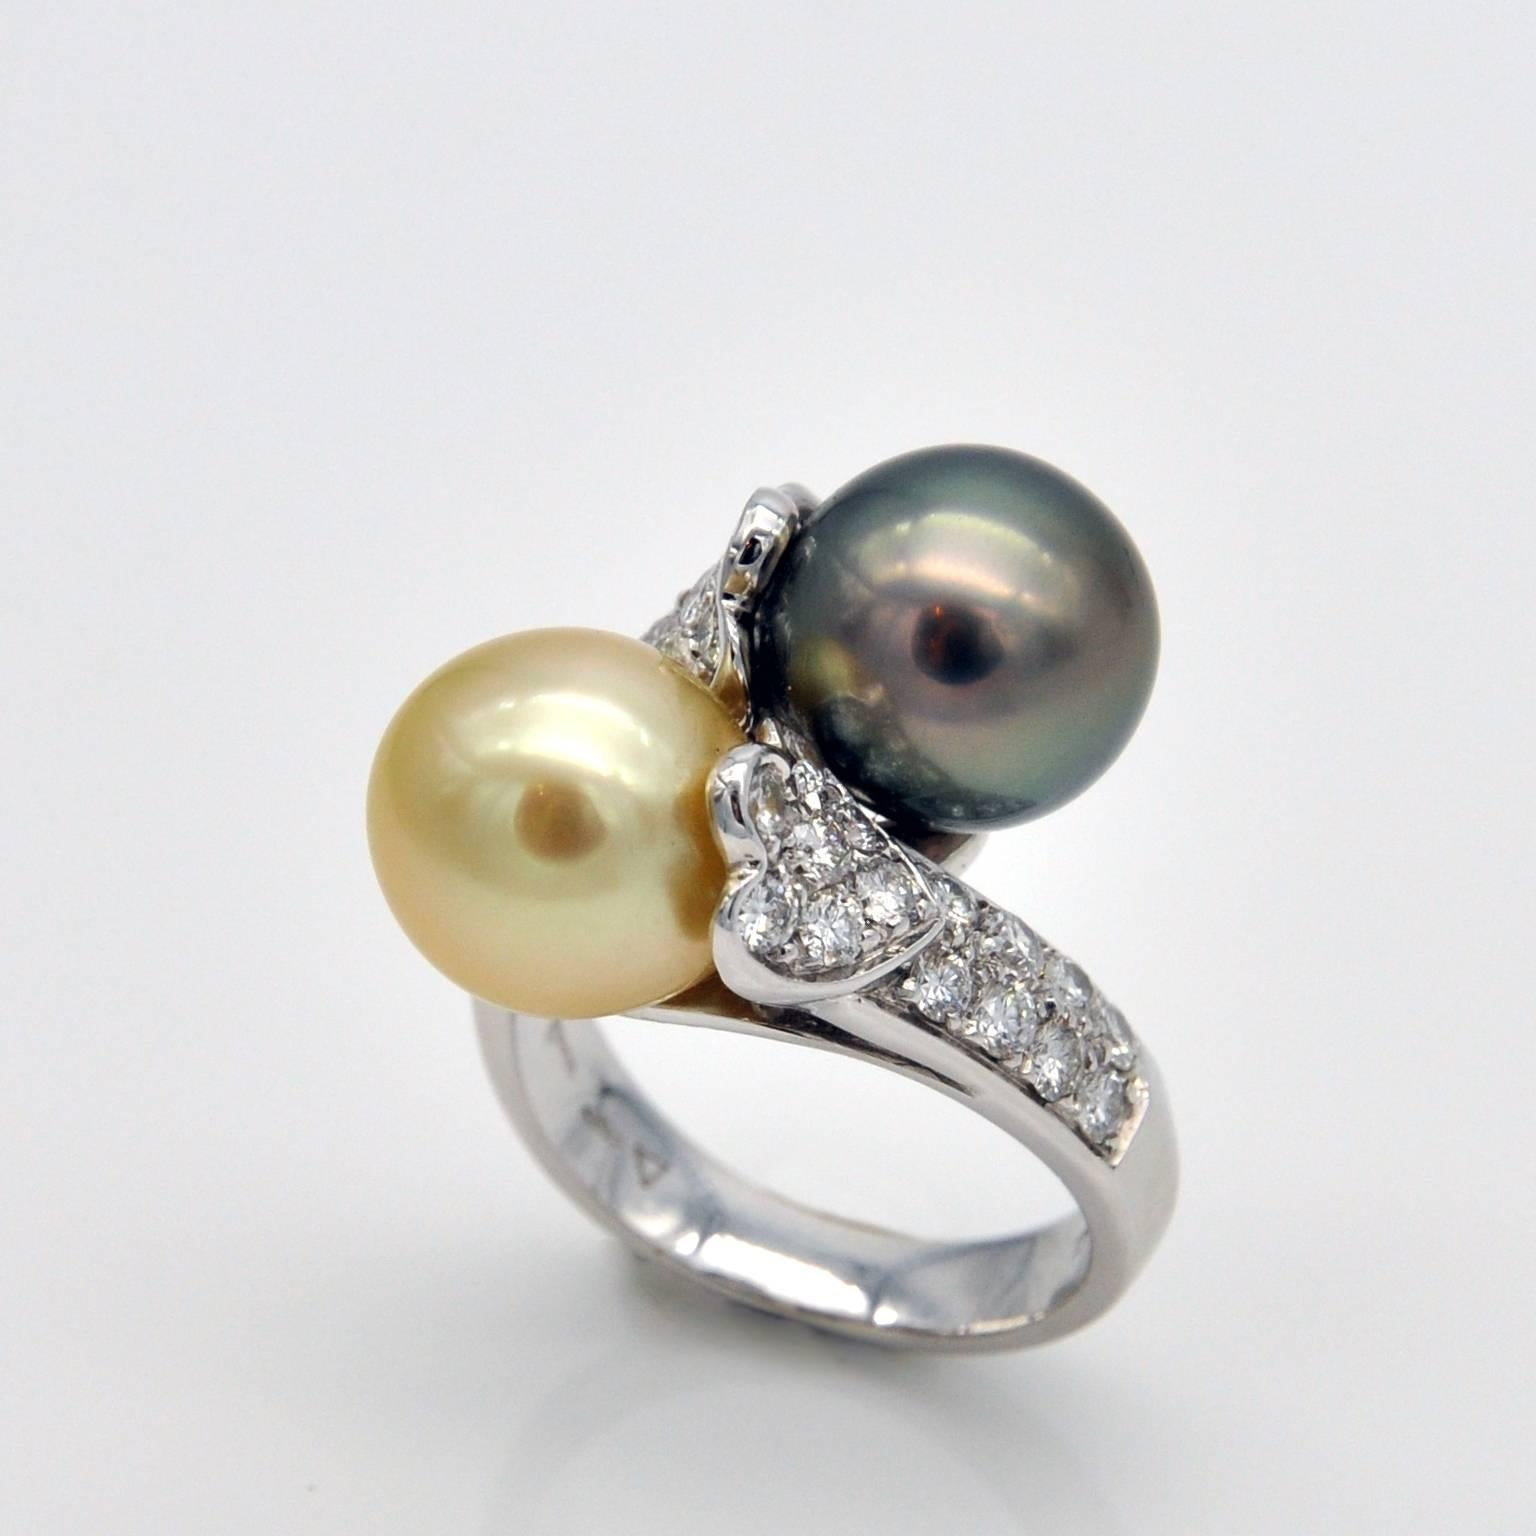 A grey Tahitian pearl and a light golden south sea pearl, set in an elegant 